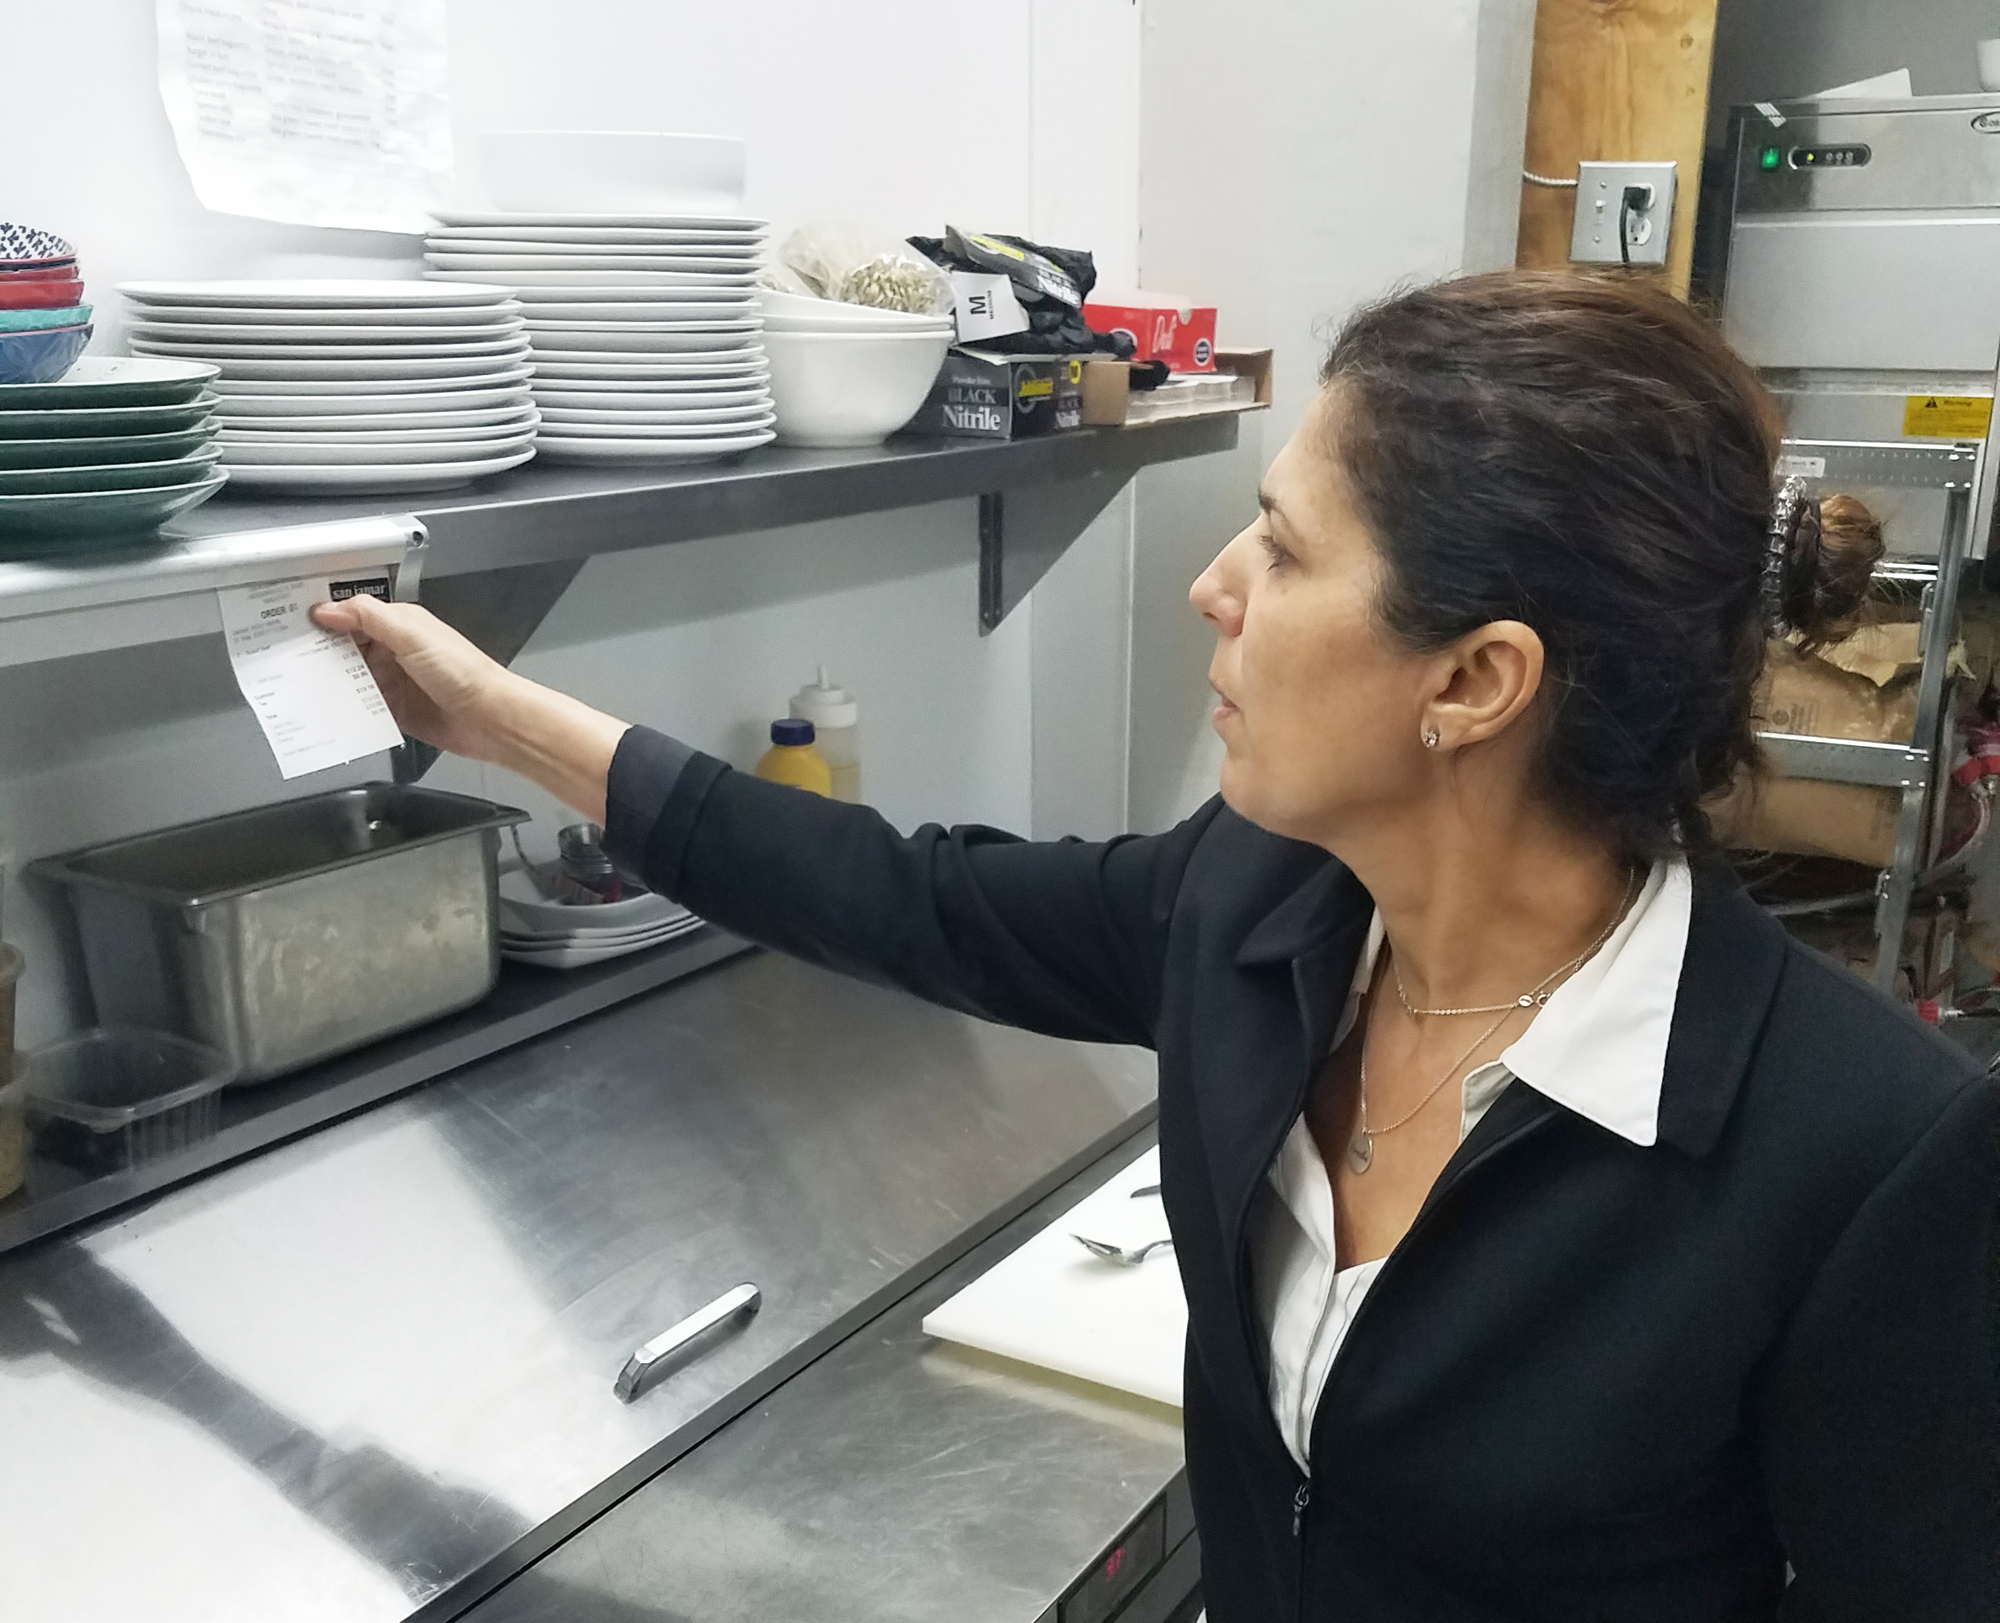 Ricki Ben Simon, who practices Orthodox Judaism,  oversees the accuracy of an order in the kitchen of her new restaurant.